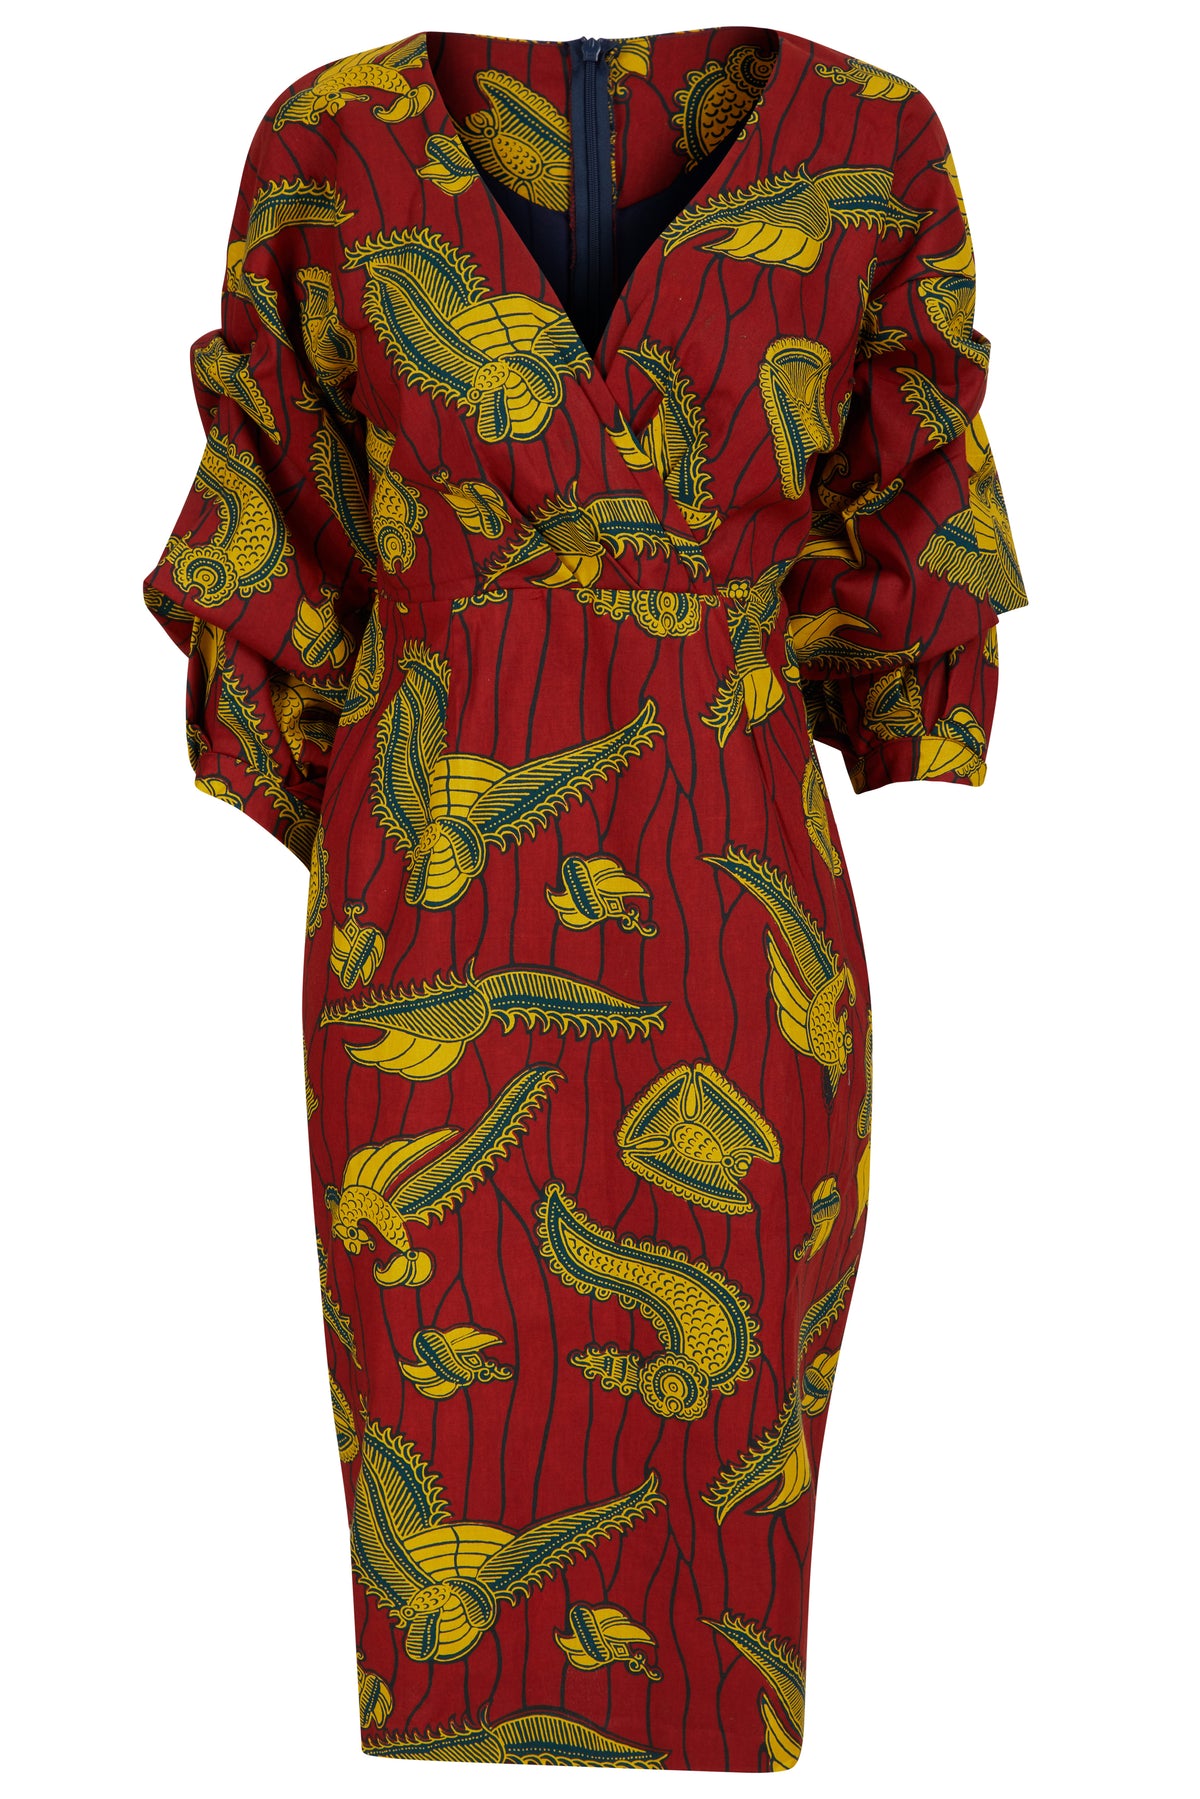 Red Coco exaggerated sleeve Midi dress - OHEMA OHENE AFRICAN INSPIRED FASHION